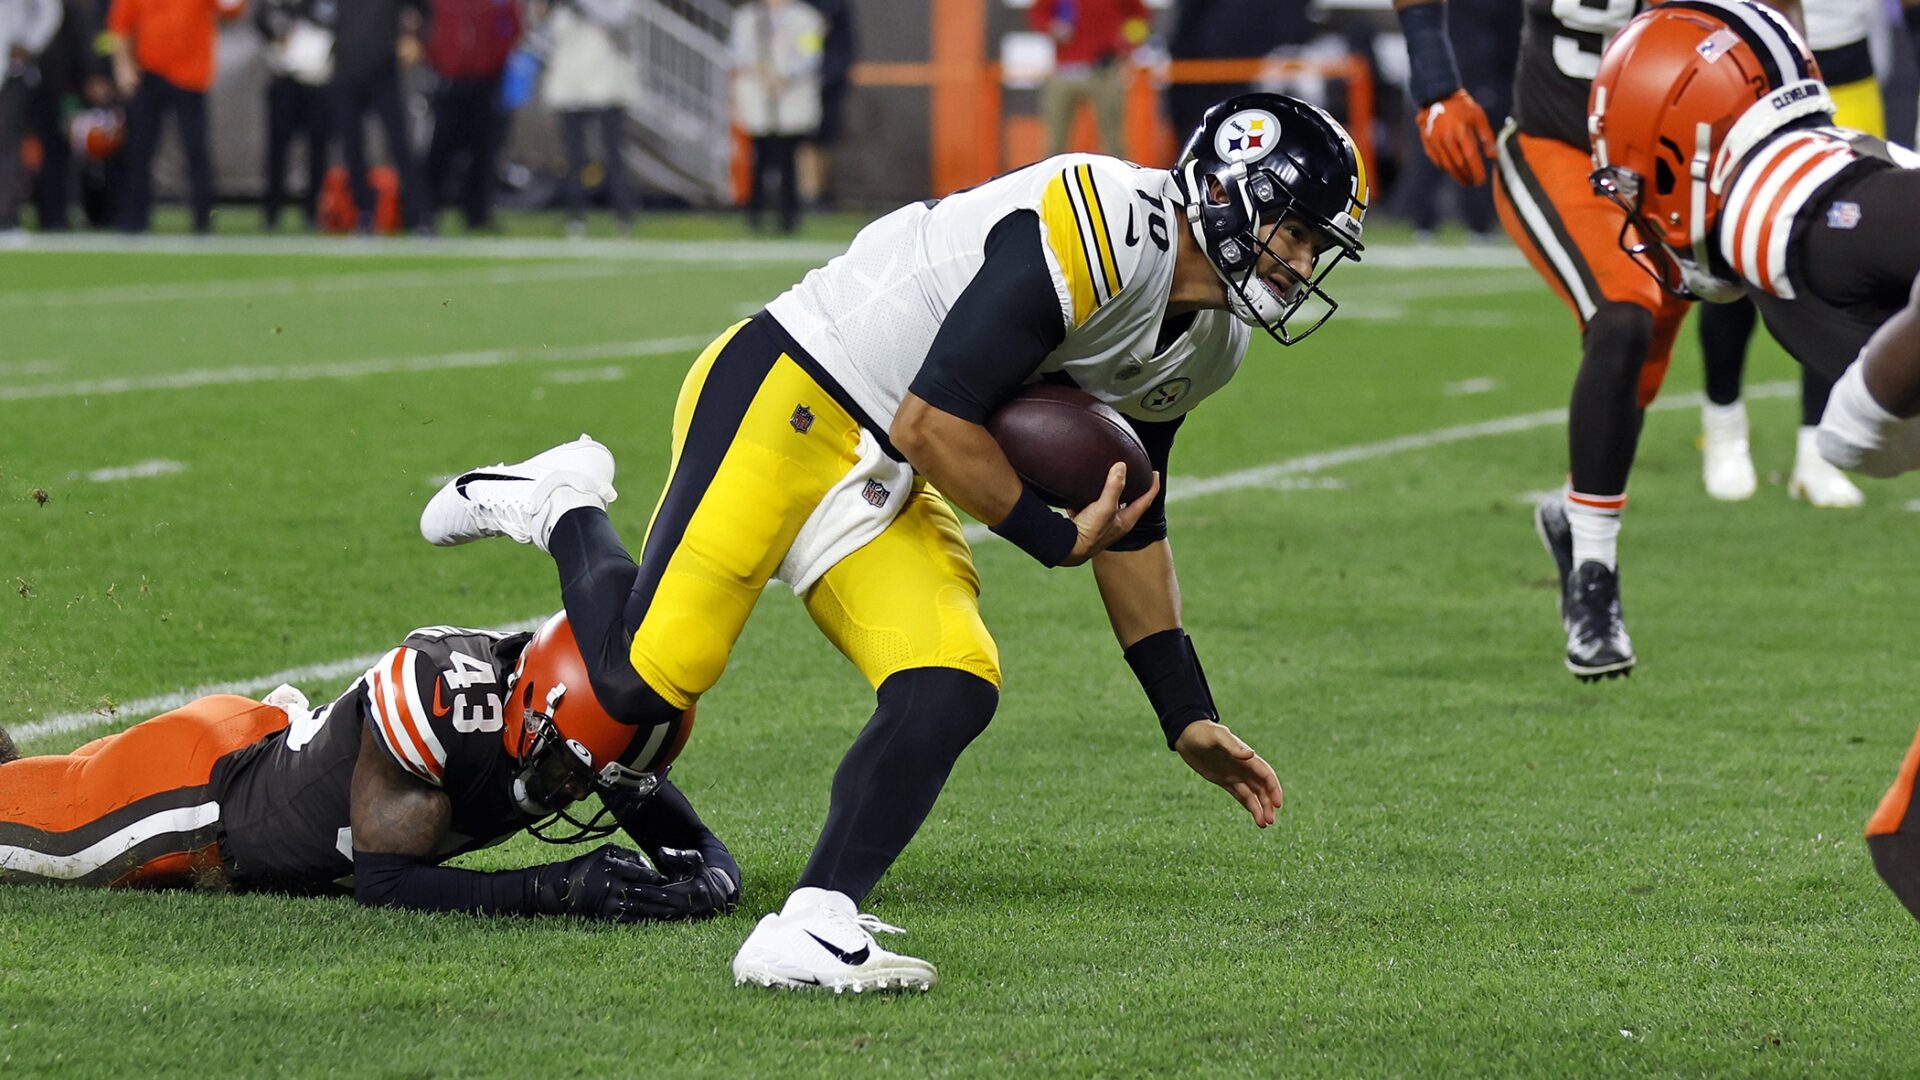 Pittsburgh Steelers quarterback Mitch Trubisky (10) slips the tackle of Cleveland Browns safety John Johnson III (43) and dives for the end zone for a touchdown during the first half of an NFL football game in Cleveland, Thursday, Sept. 22, 2022